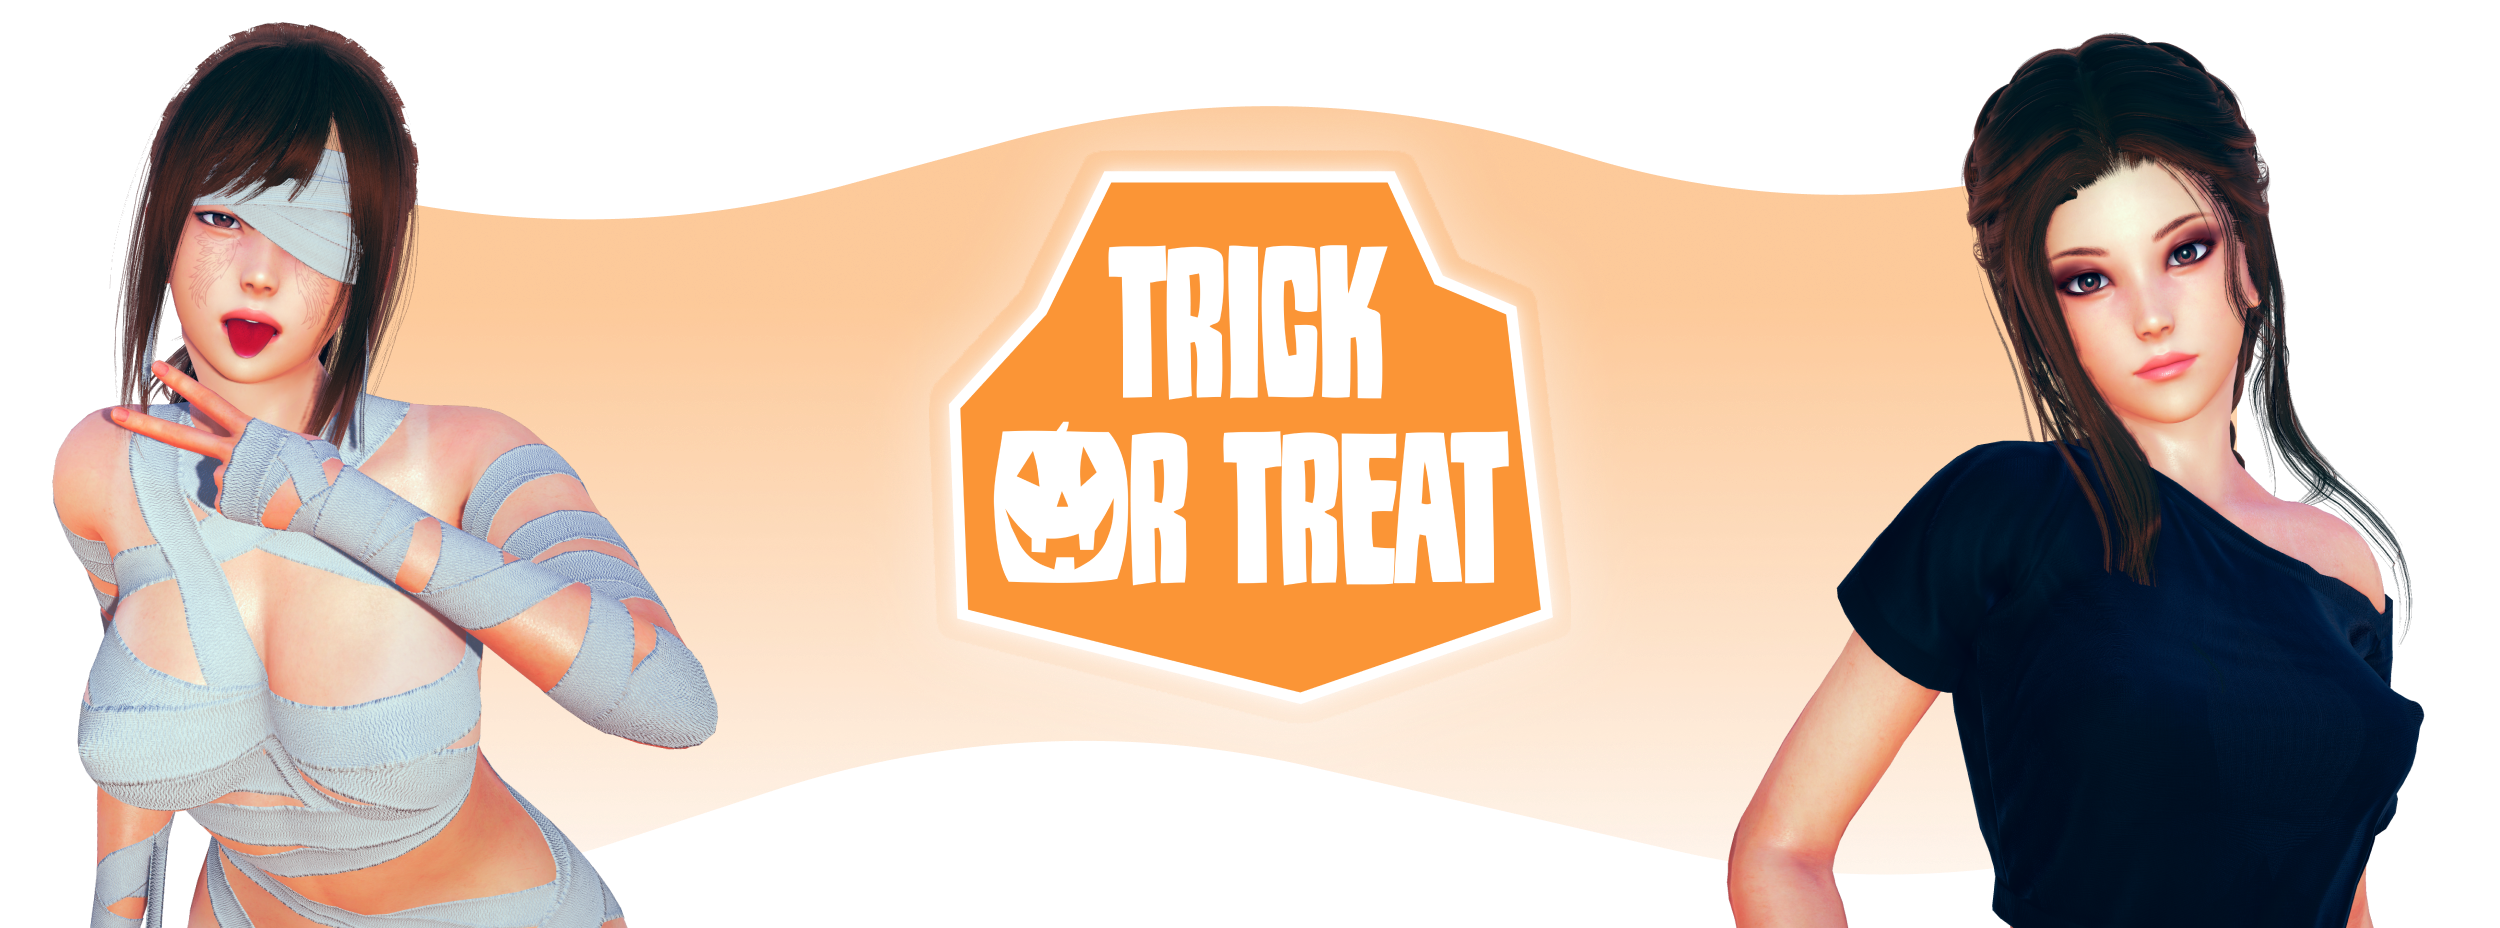 [18+] Trick or Treat